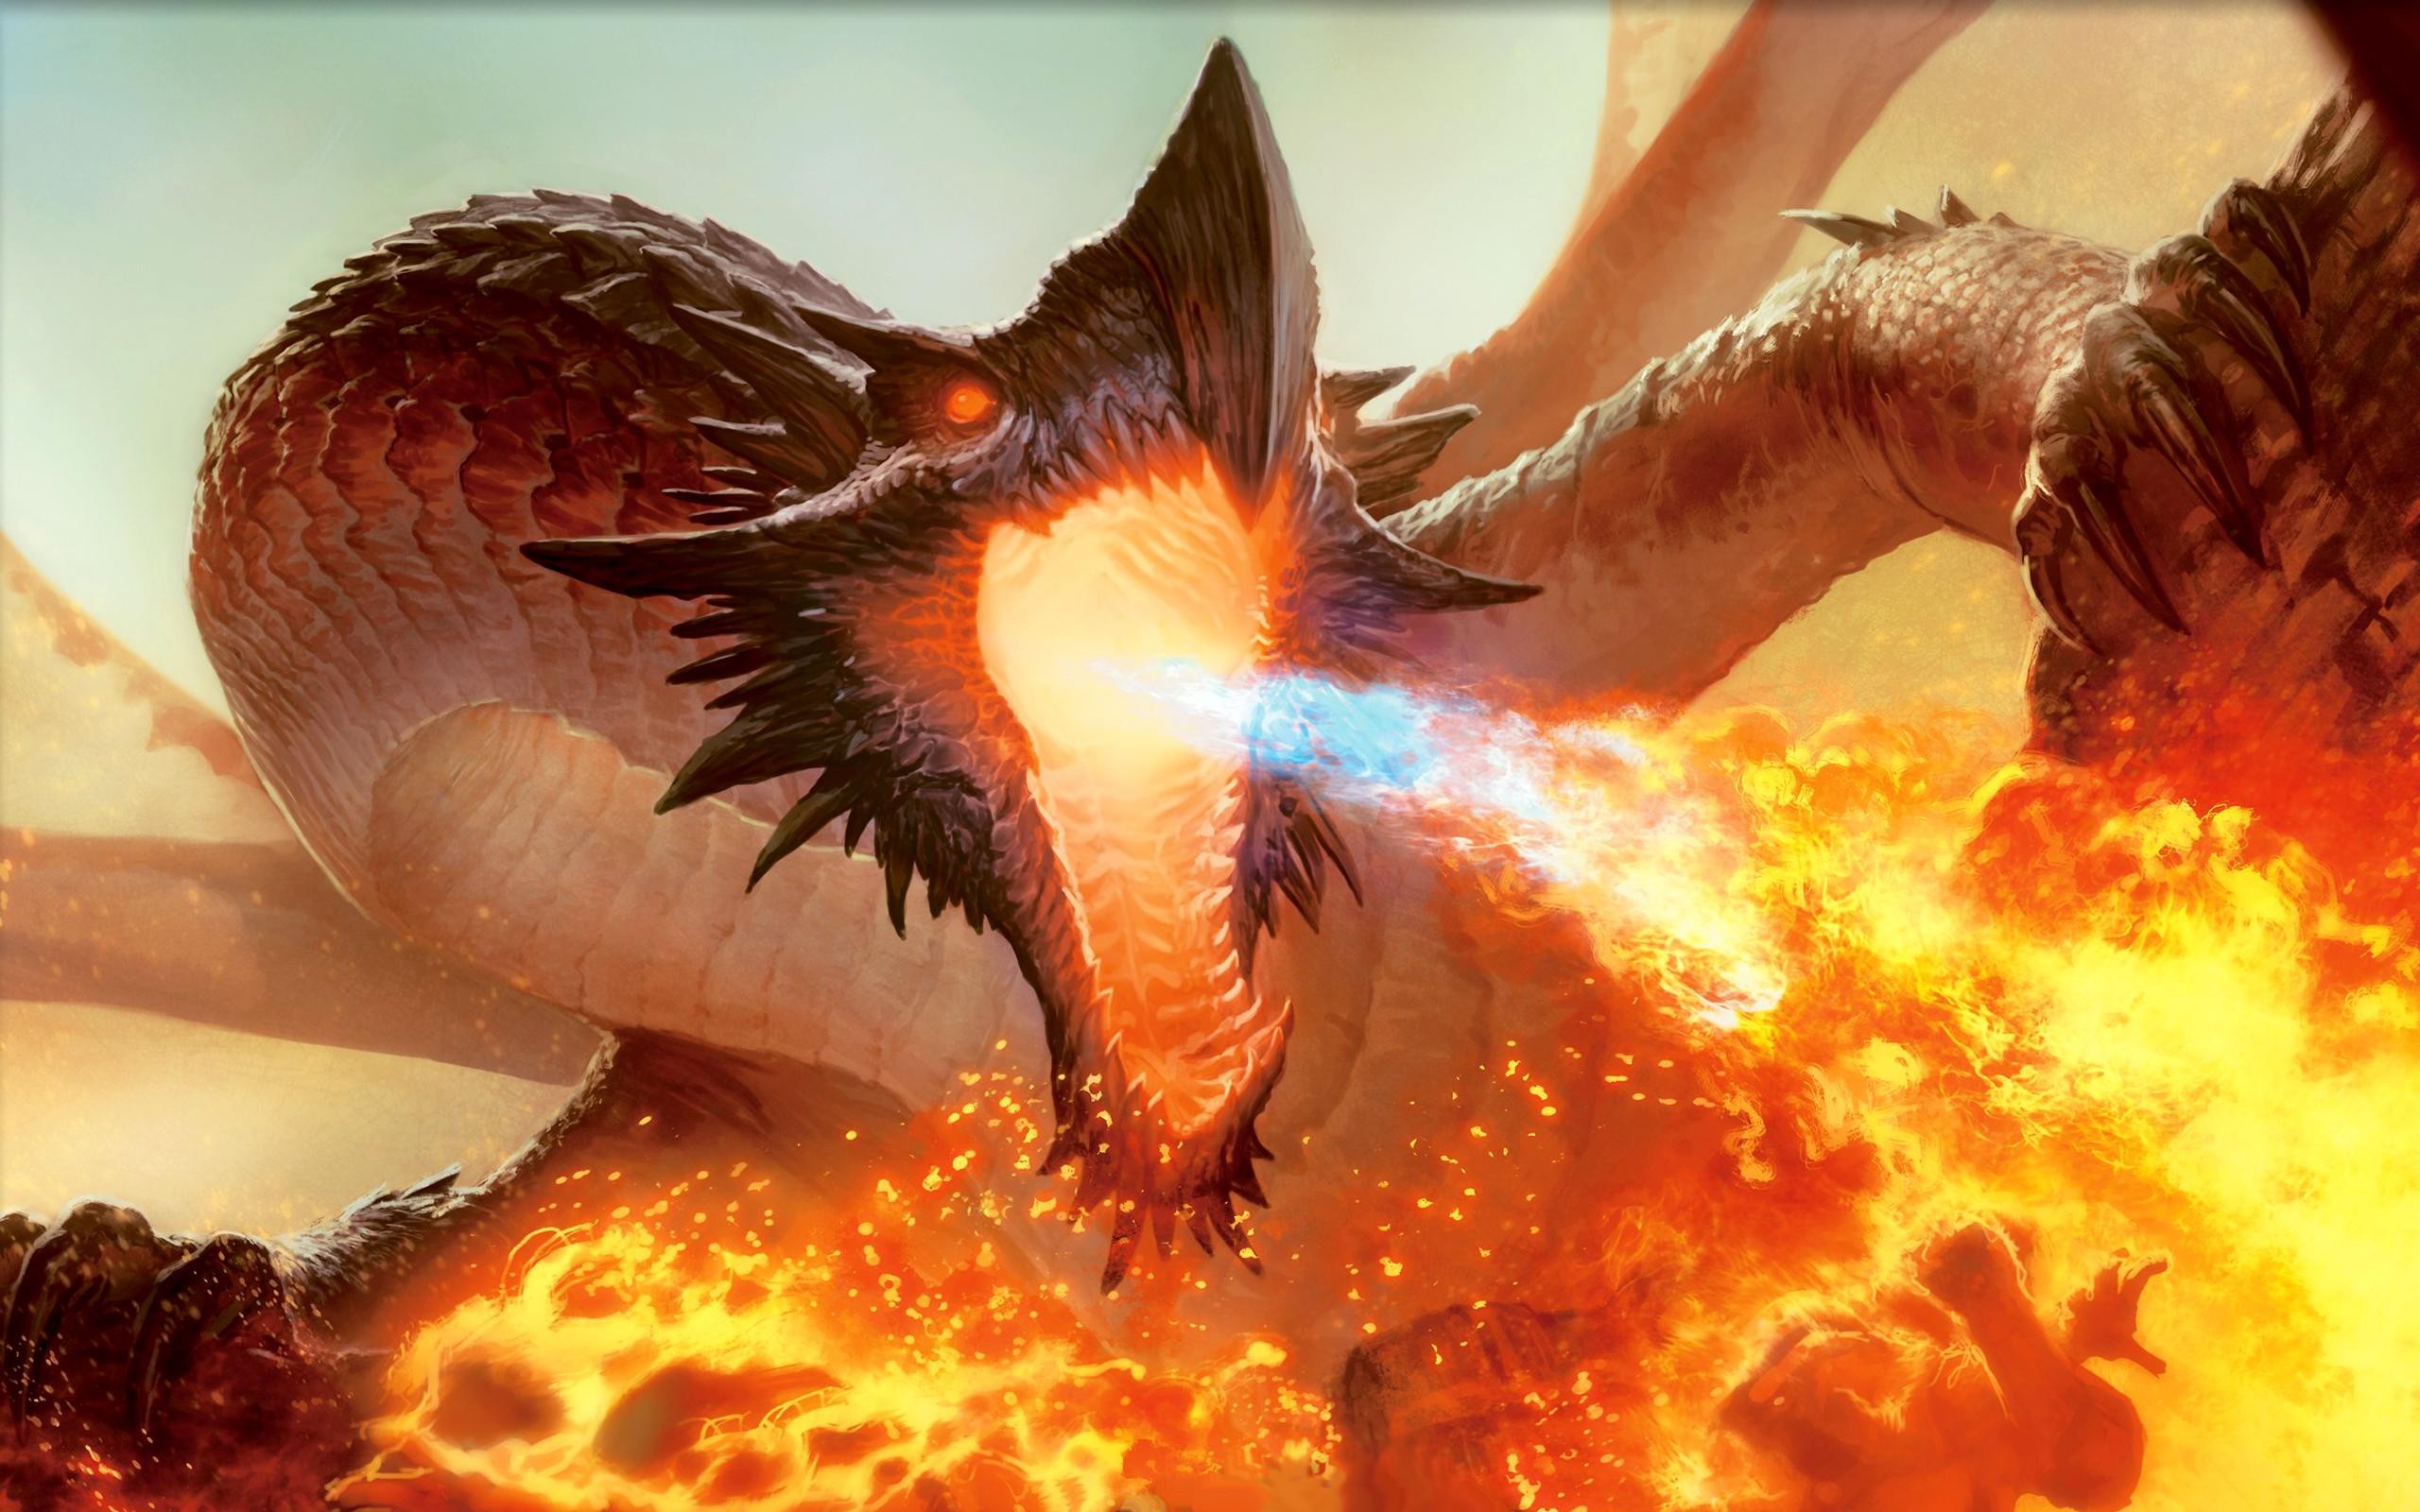 Above Is Fire Breathing Dragon Wallpaper In Resolution